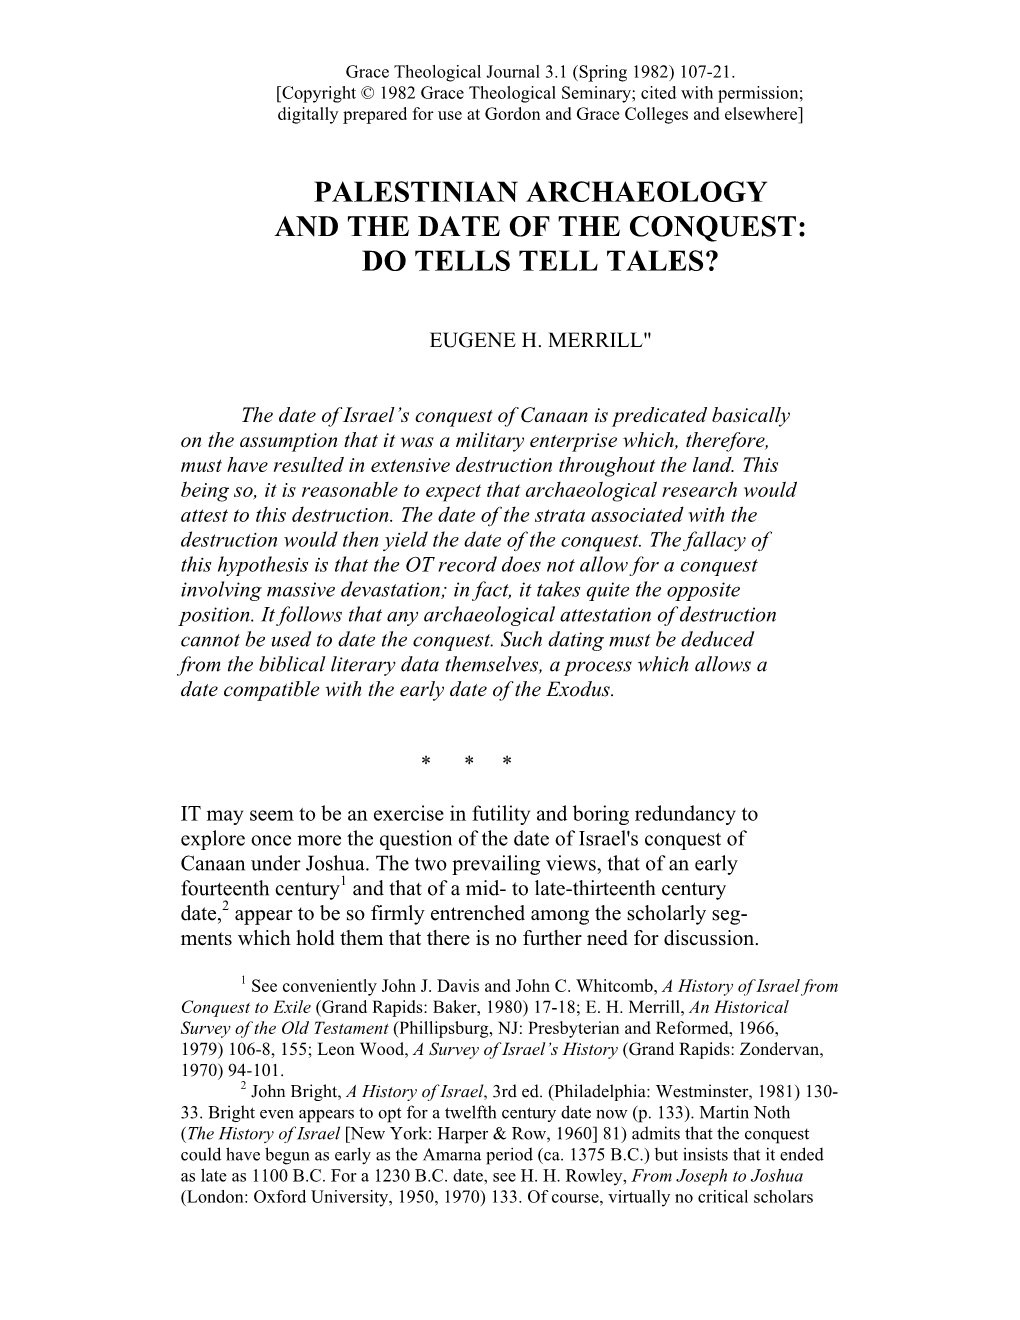 Palestinian Archaeology and the Date of the Conquest: Do Tells Tell Tales?